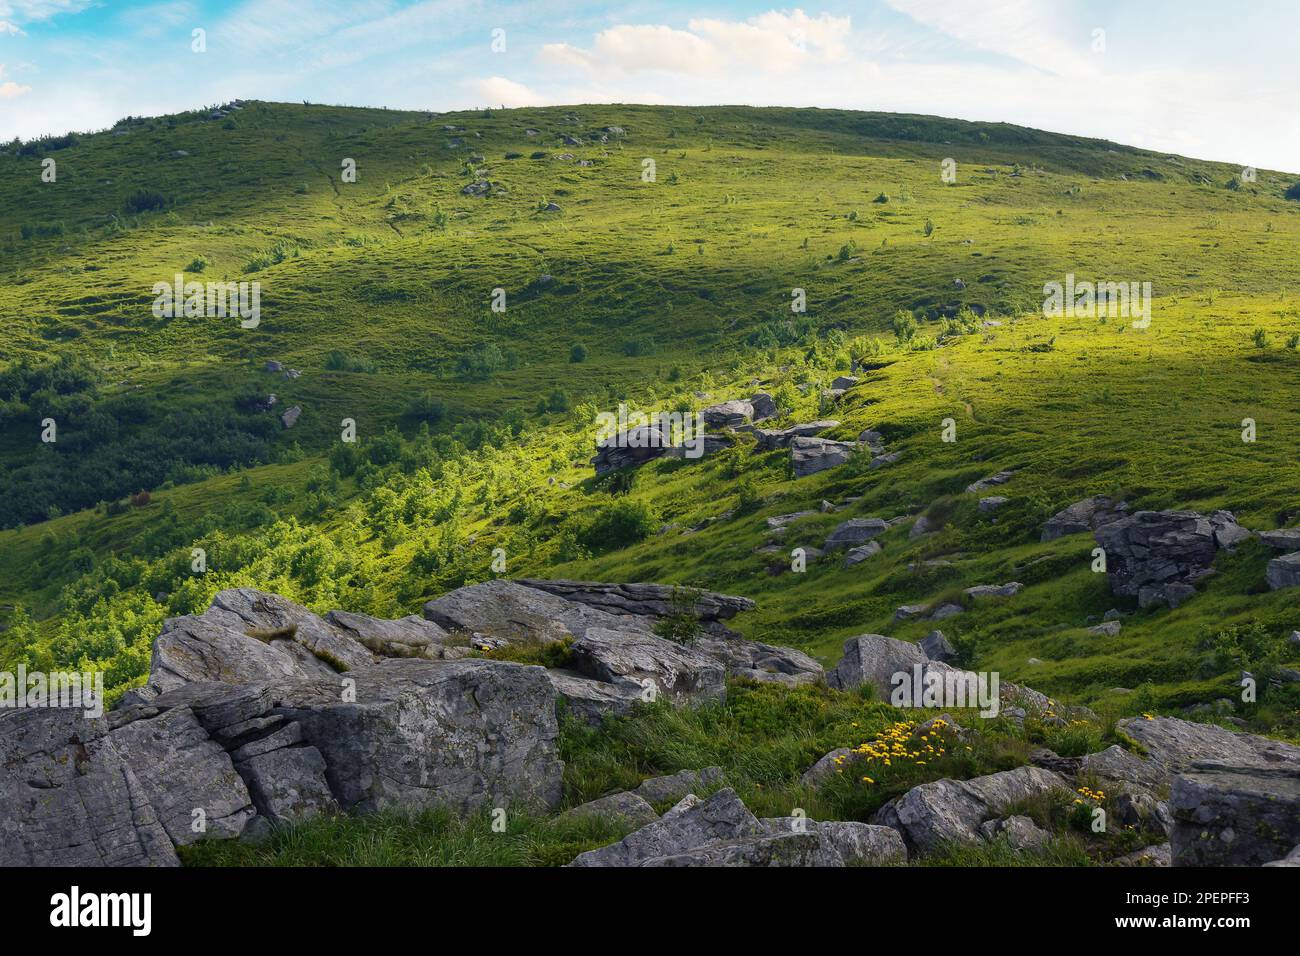 wonderful summer landscape in mountains. grassy meadows and rolling hills. boulders and stones on the hillside. picturesque scene in morning light. uk Stock Photo